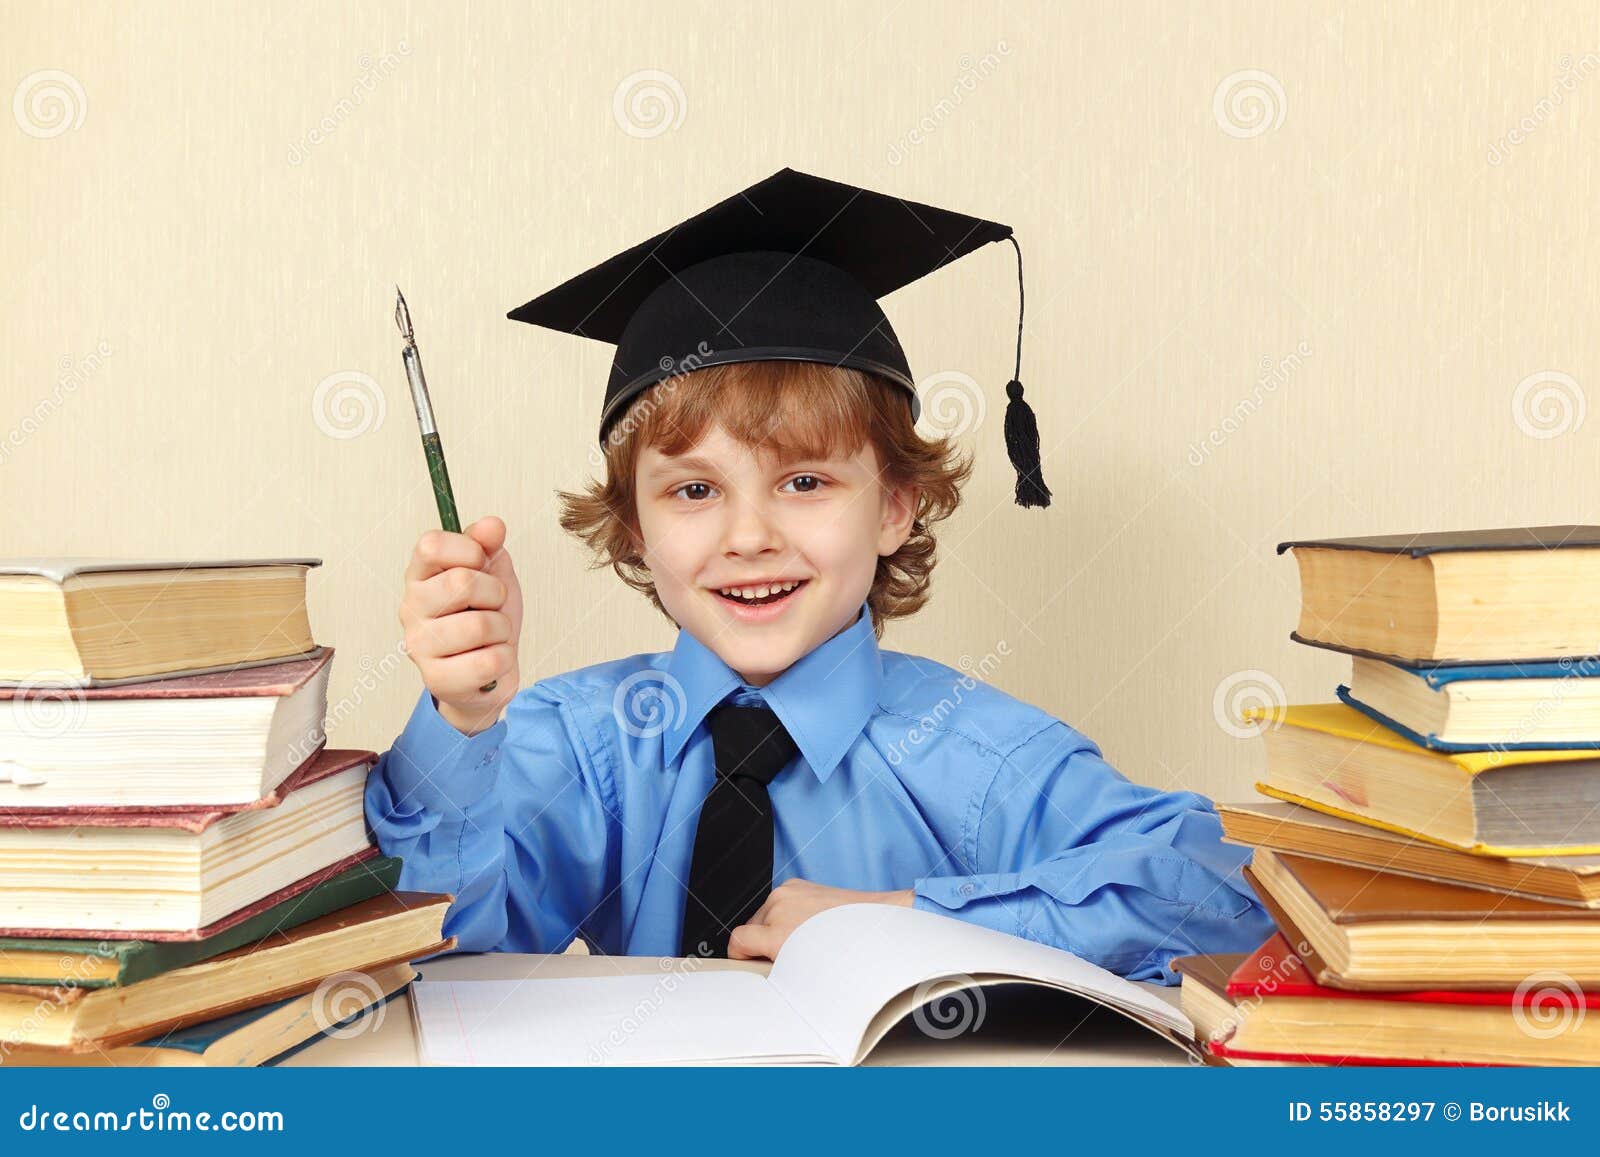 little smiling boy in academic hat with rarity pen among old books